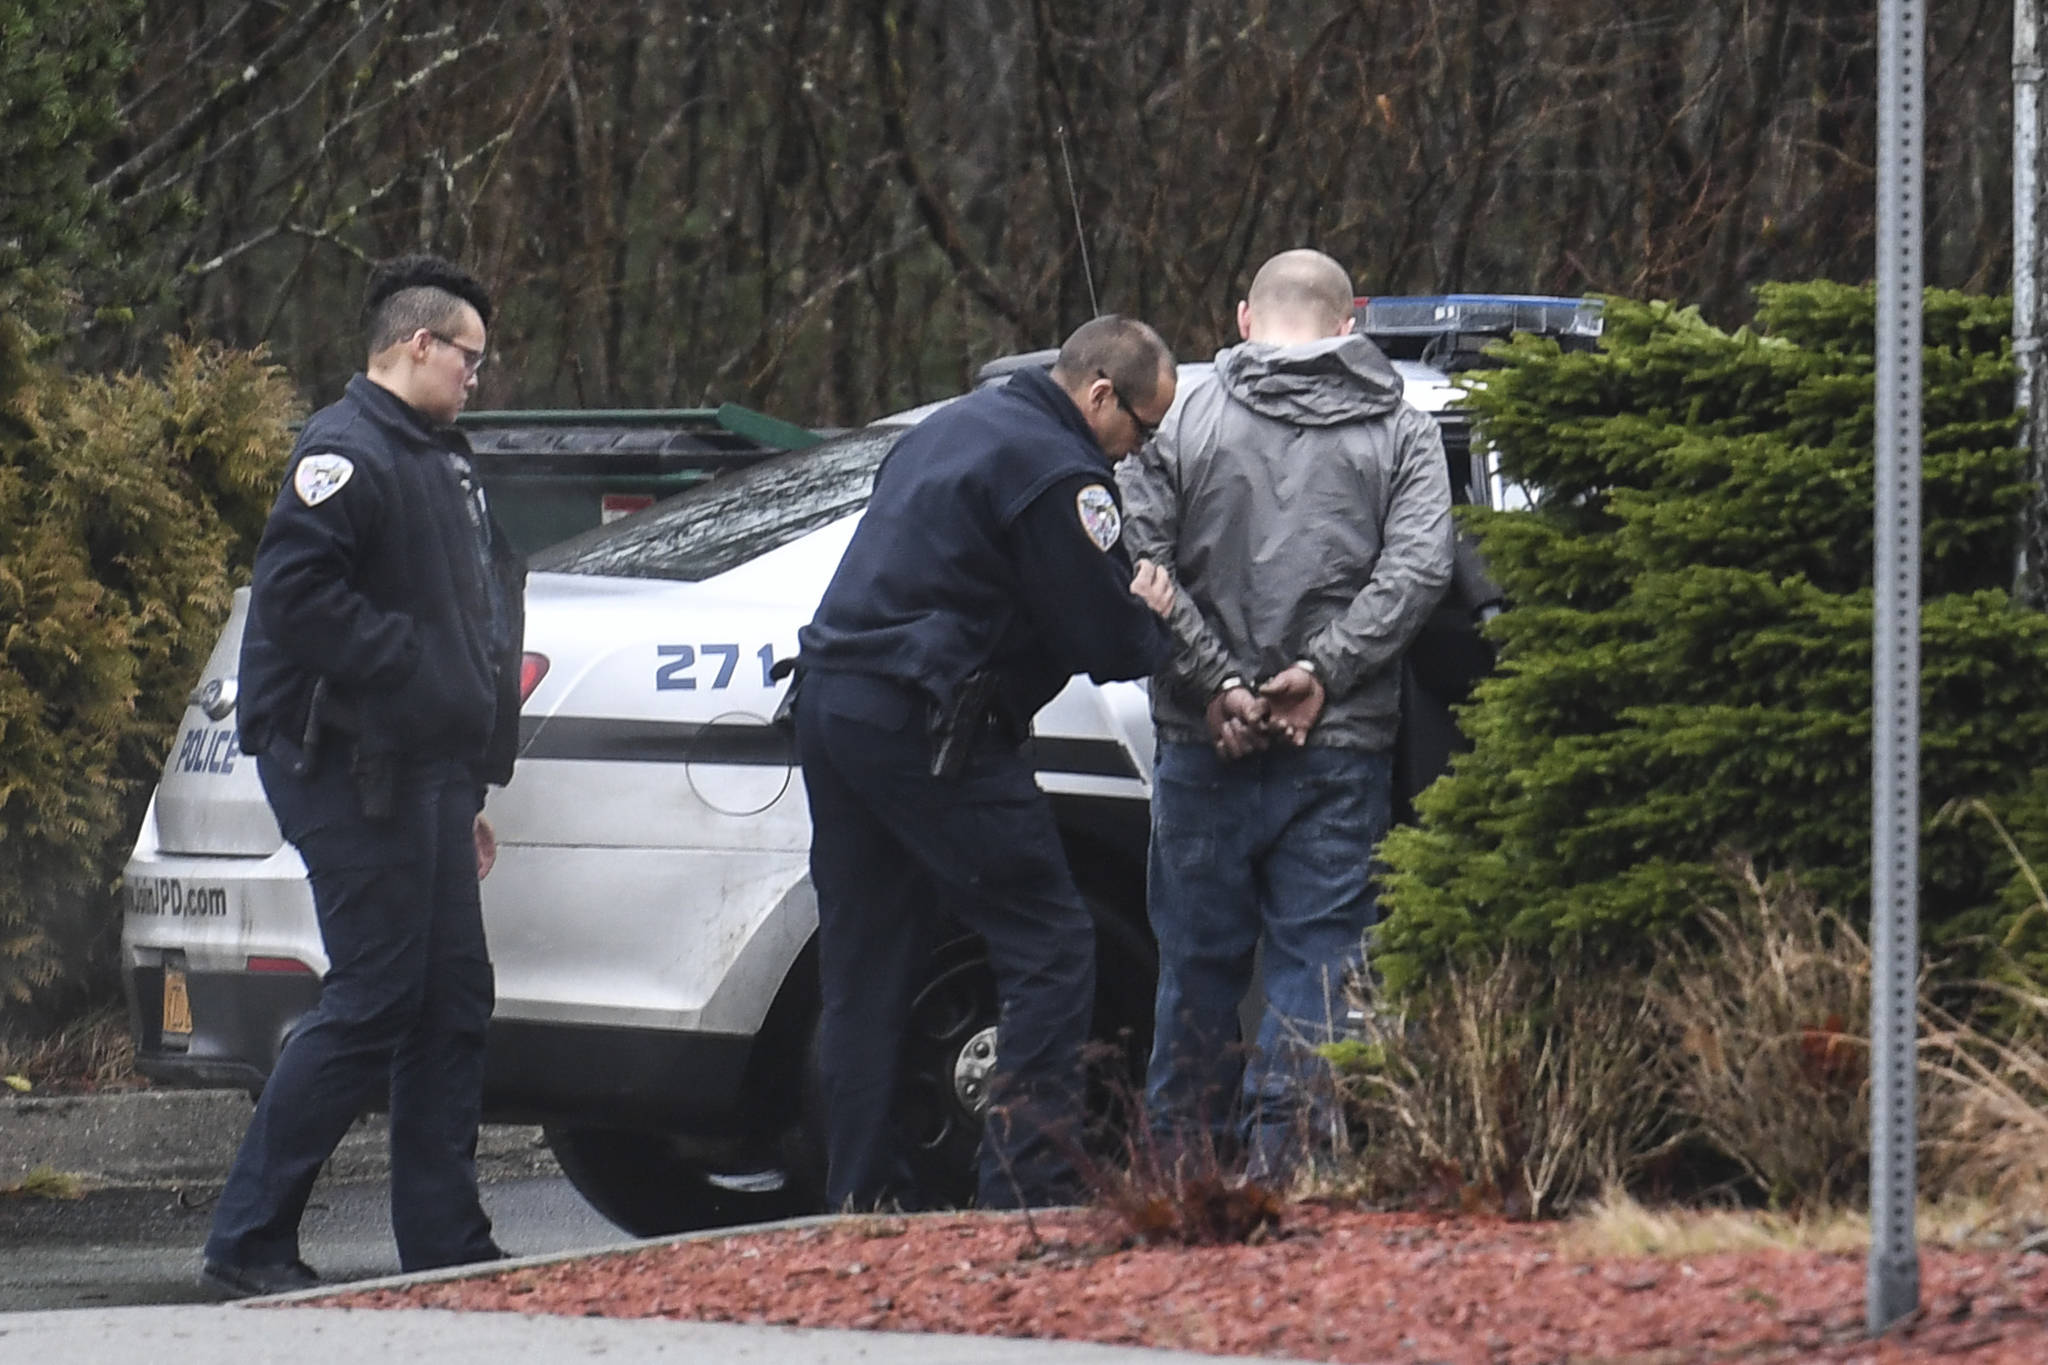 Juneau Police Officer Jim Quinto, center, and CJ Warnaca put Nick Morgan into the back of a police cruiser at the Department of Transportation and Public Facilities Buildig on Channel Drive on Wednesday, Dec. 11, 2019. Morgan was a suspect involved with a stolen vehicle parked in the department’s lot. (Michael Penn | Juneau Empire)